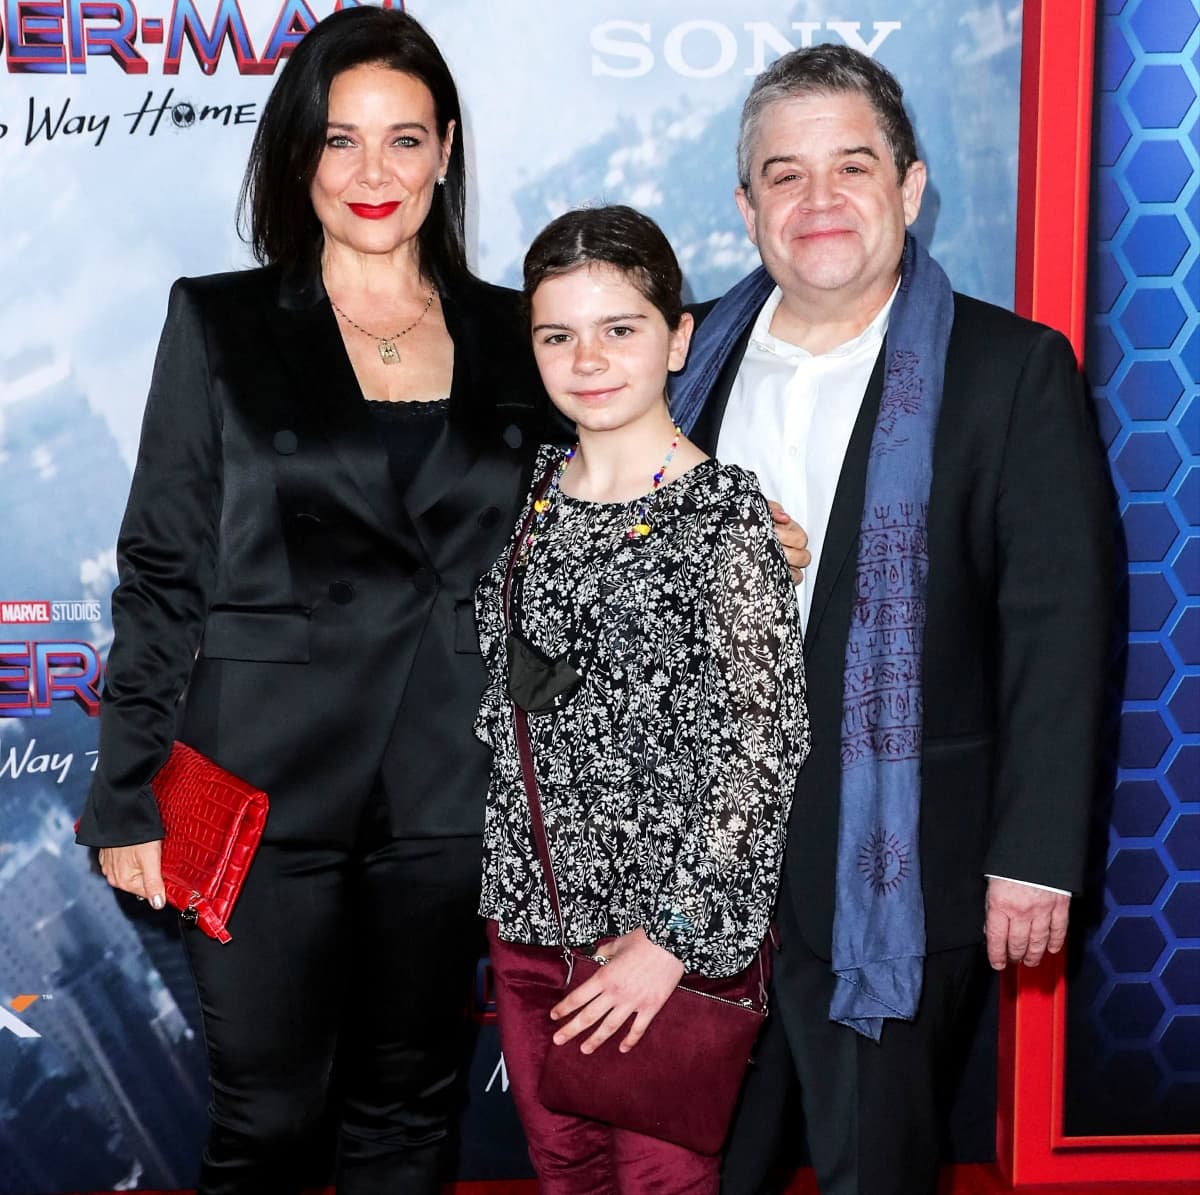 Meredith Salenger, Alice Rigney Oswalt, and Patton Oswalt making a family night out of the premiere of Spider-Man: No Way Home